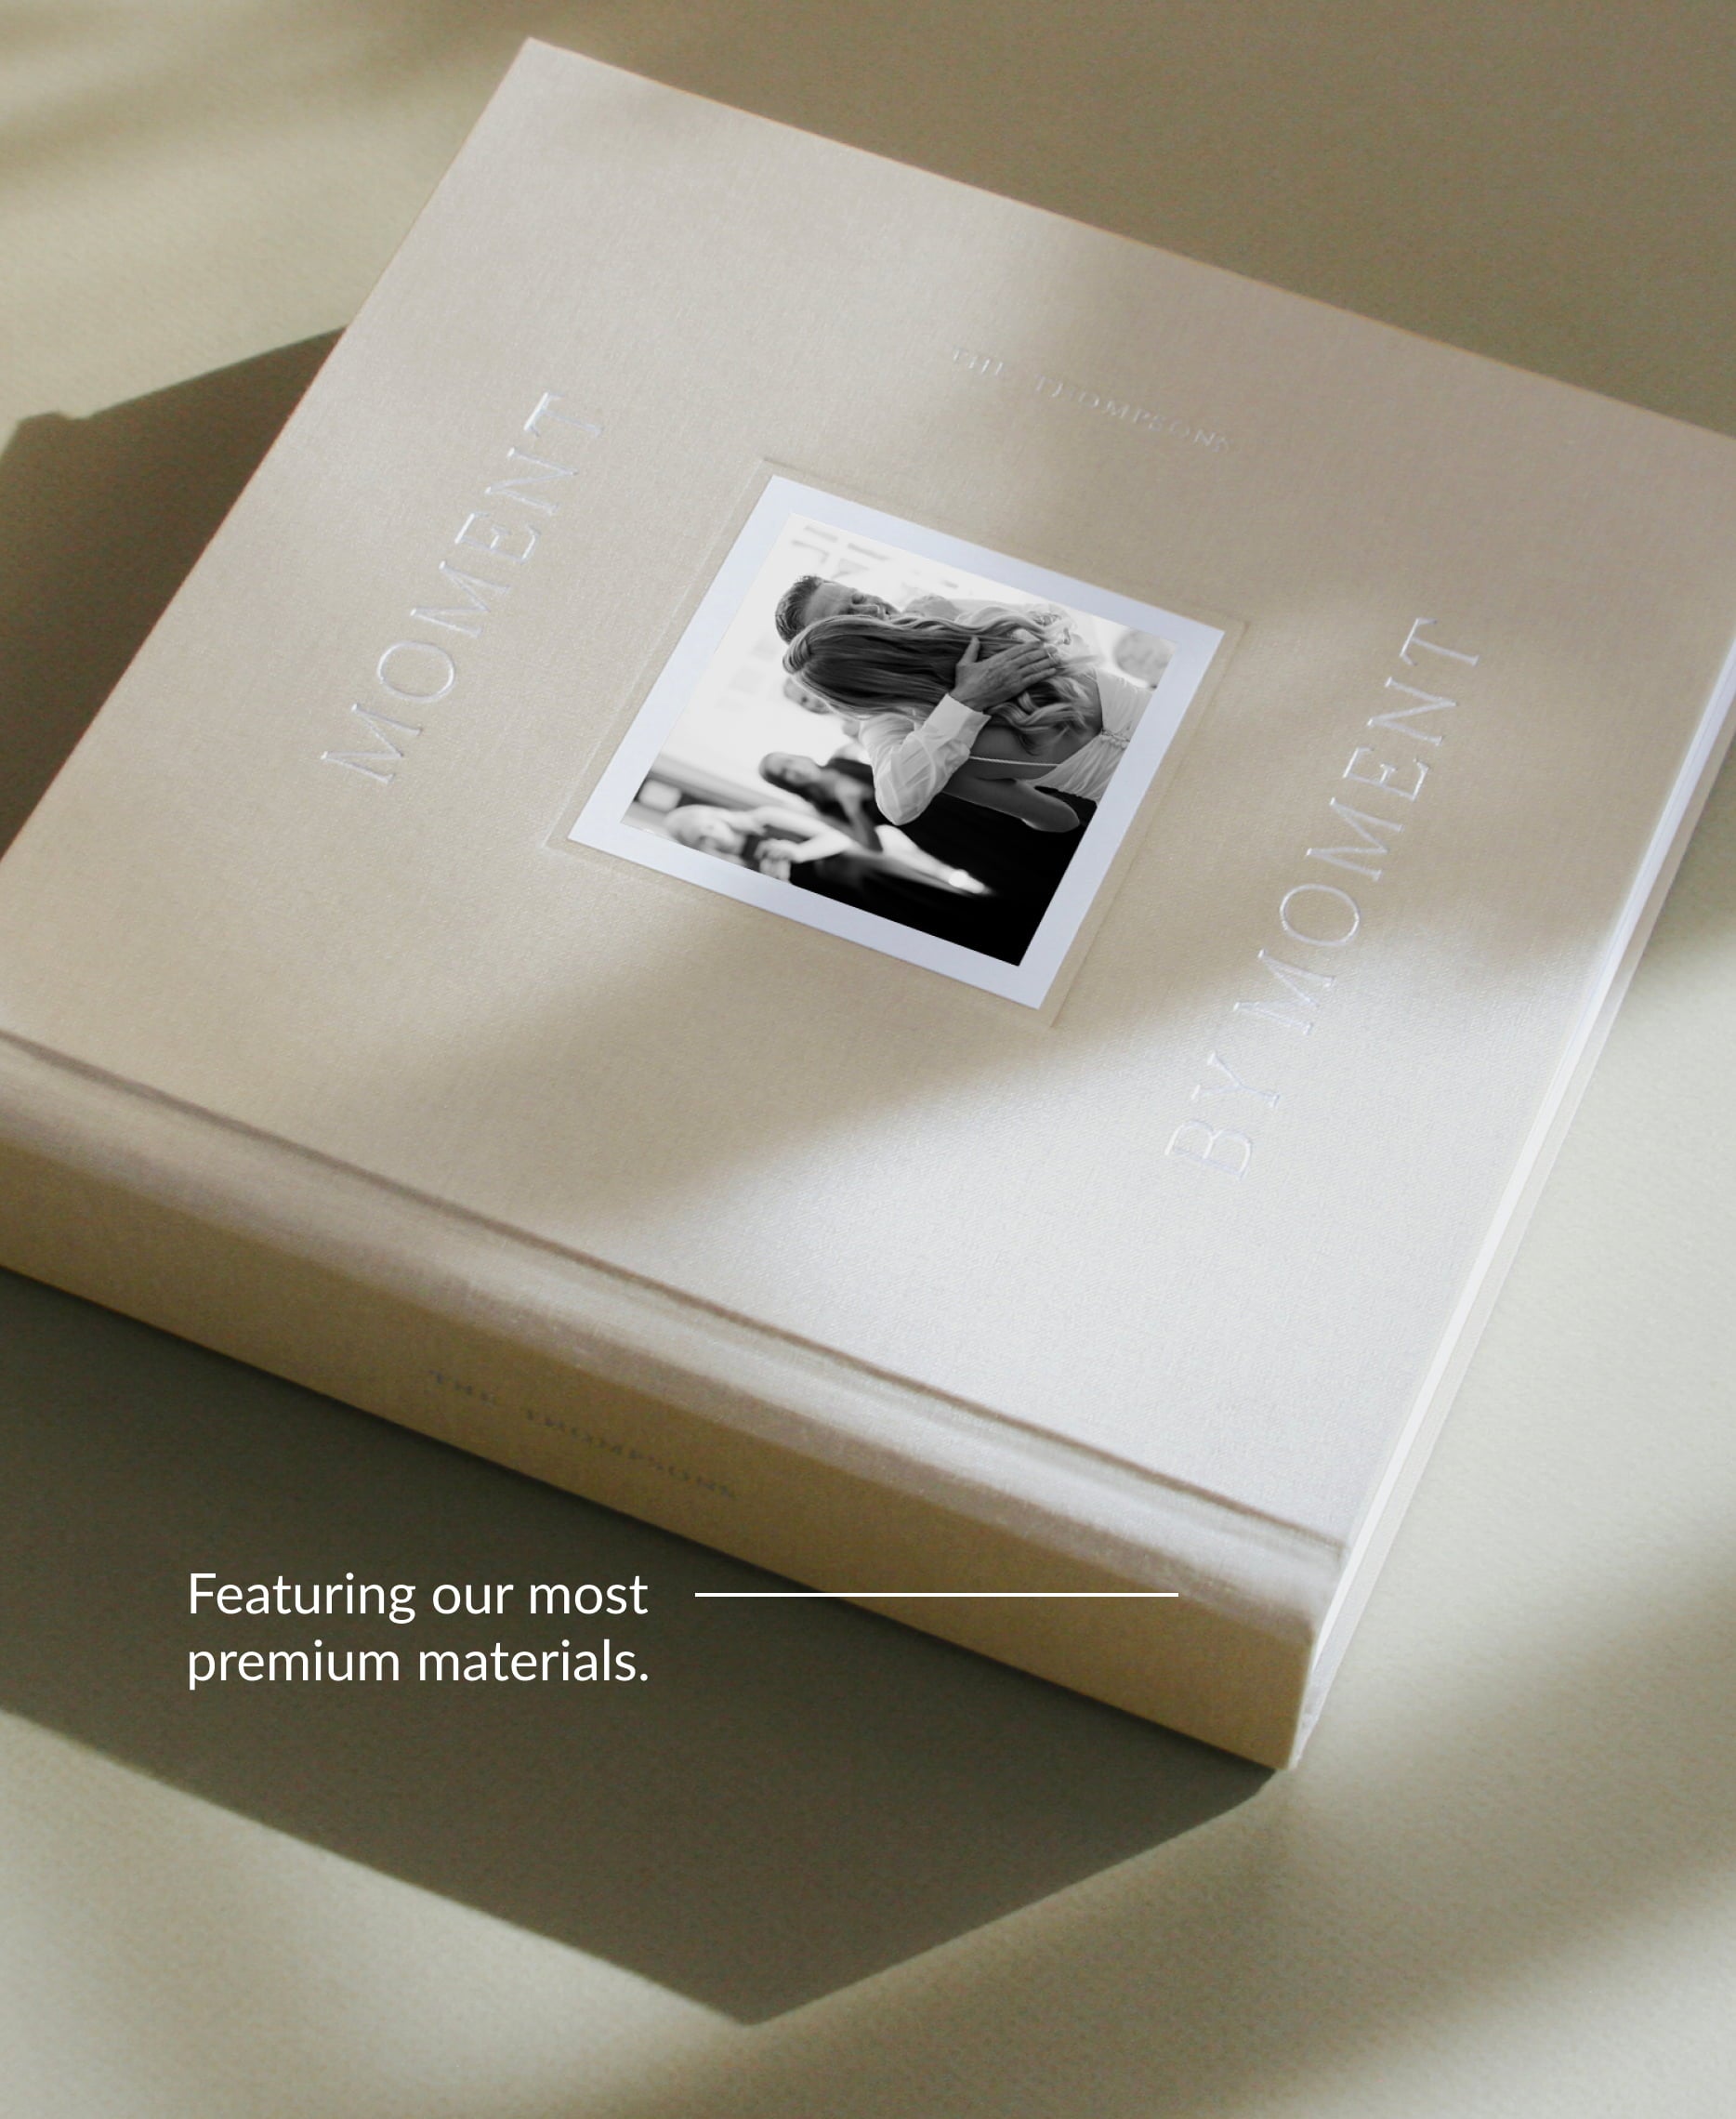 Closed Signature Layflat Photo Album showcasing cover image, foil stamped cover title, made from premium materials